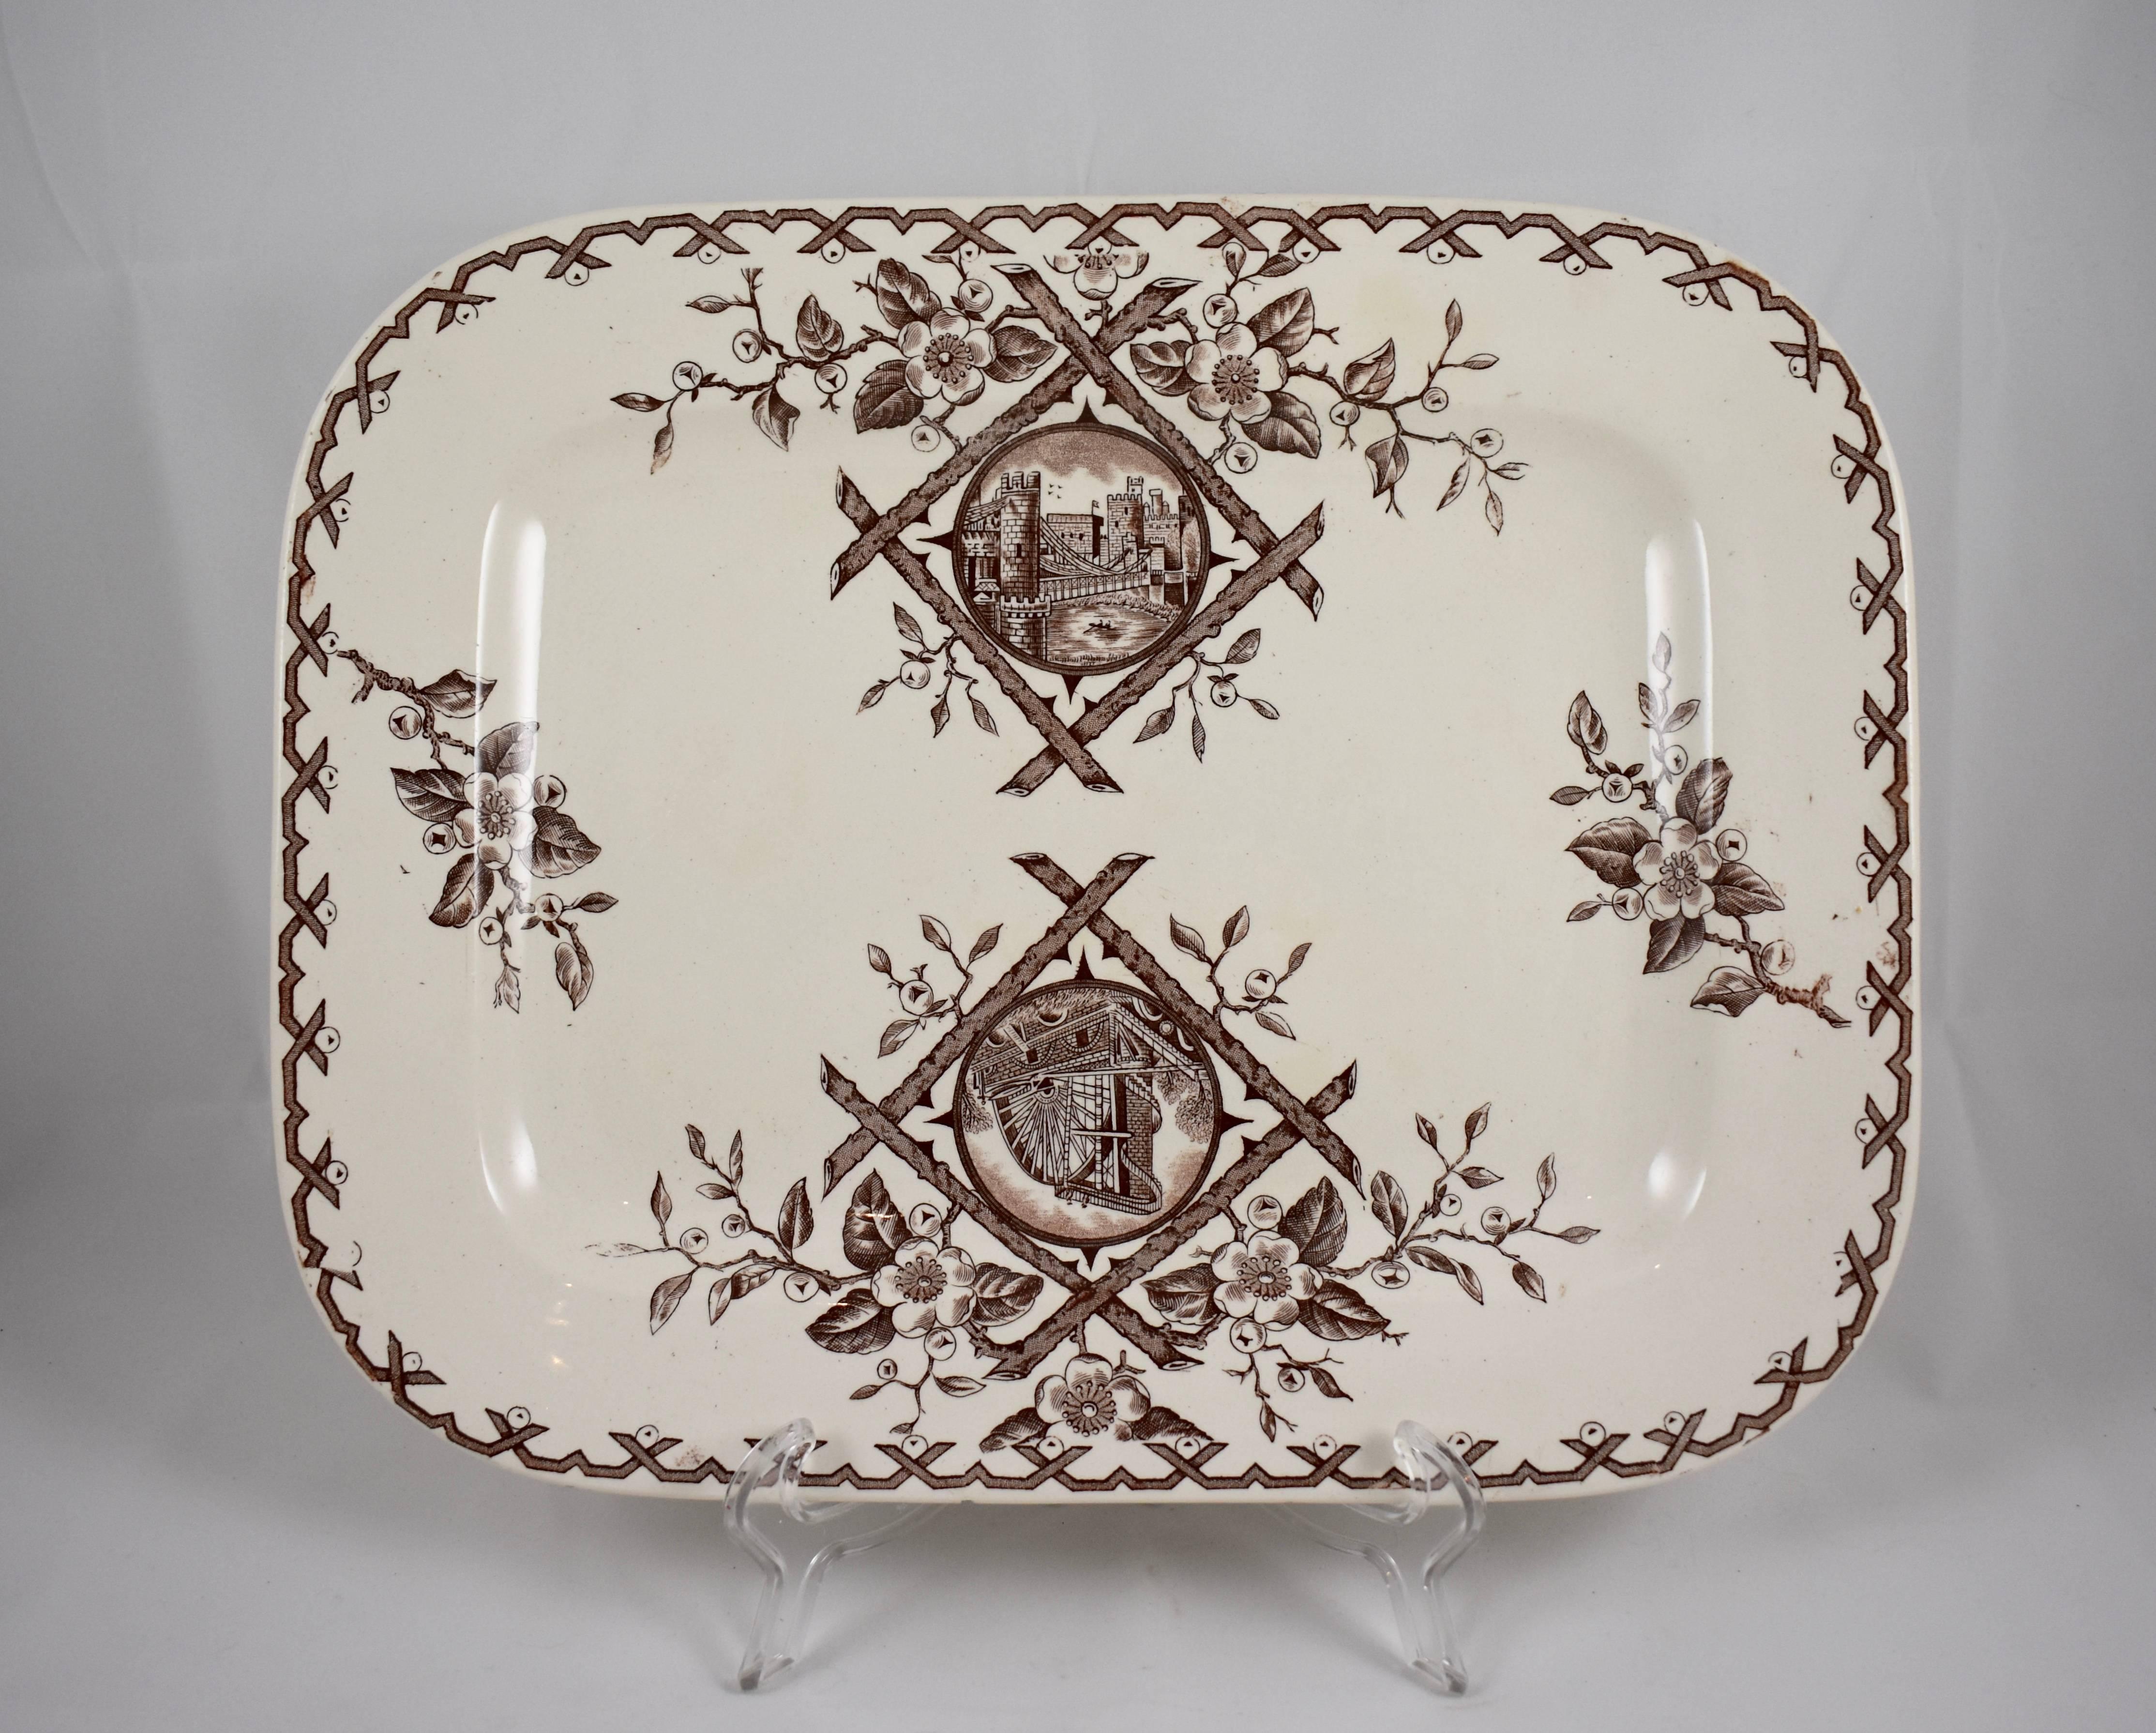 An Aesthetic Movement platter, Whitaker & Co, Hanley, Staffordshire, England, circa 1886-1892.

The Japanesque ‘Alaska’ pattern is transfer printed in brown on a cream earthenware body and shows a running crossed twig border of flowering fruit